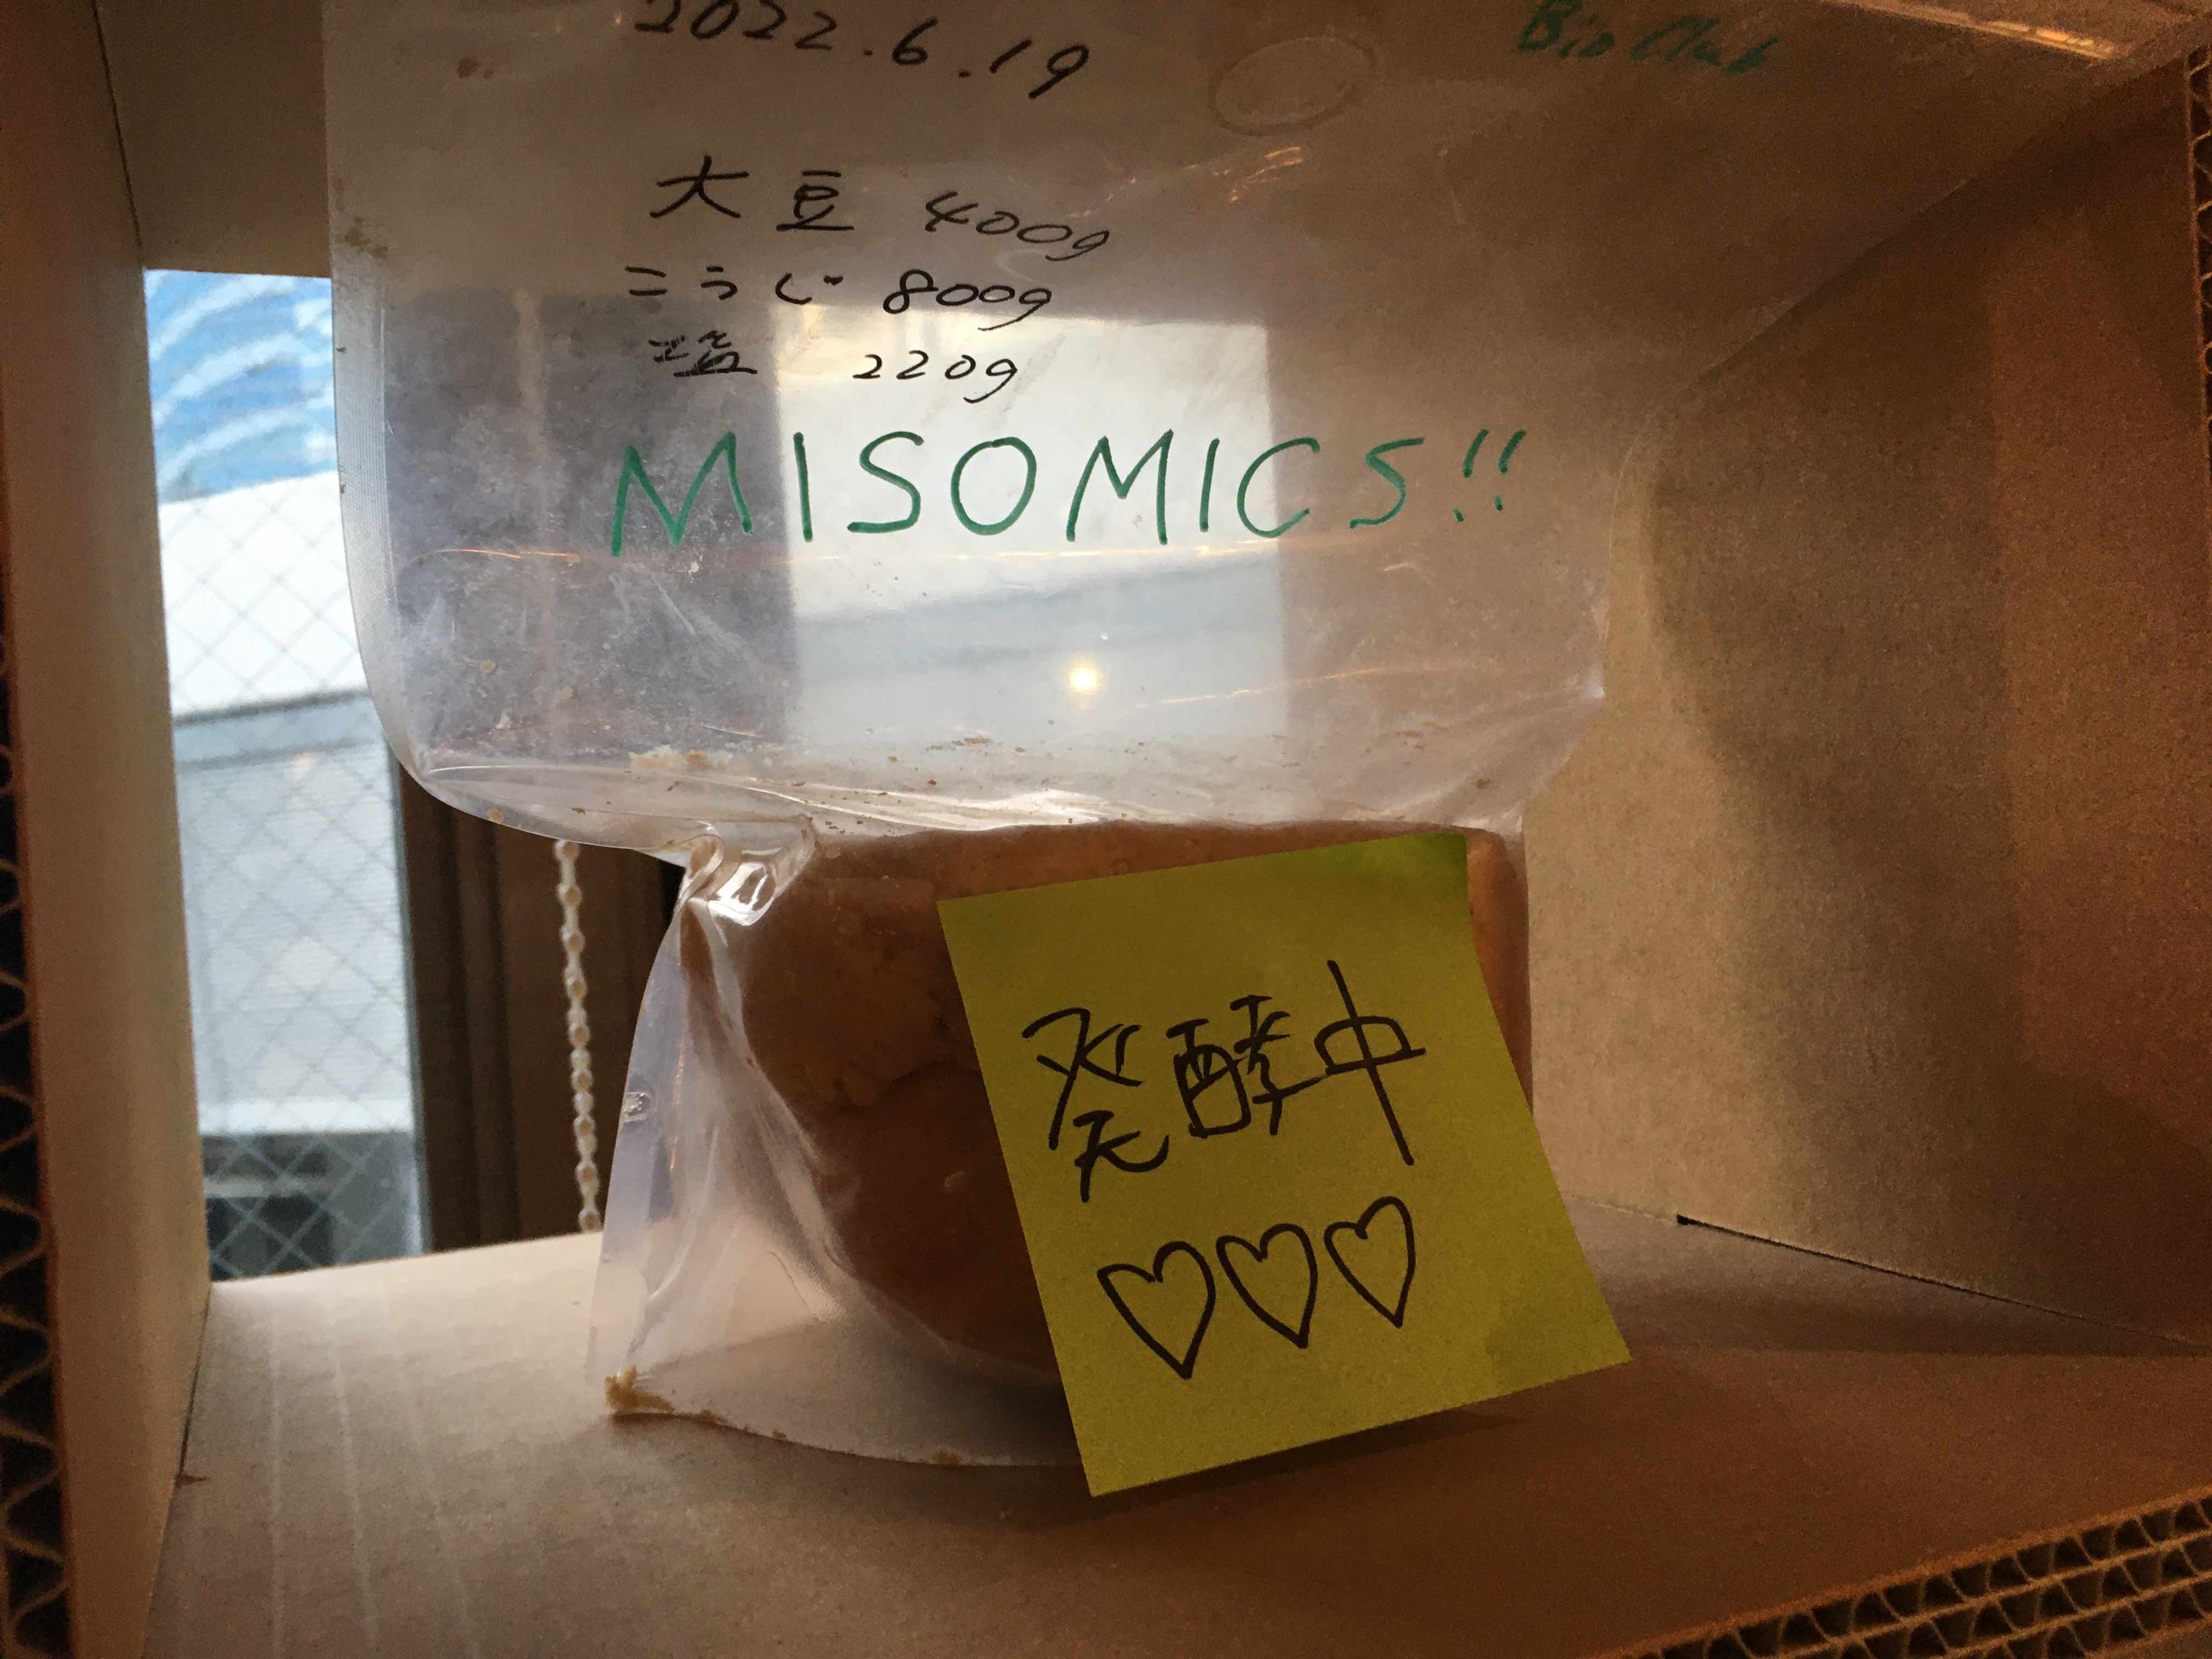 Misomics: A Citizen Science-driven Genome Project of the Miso Microbiome